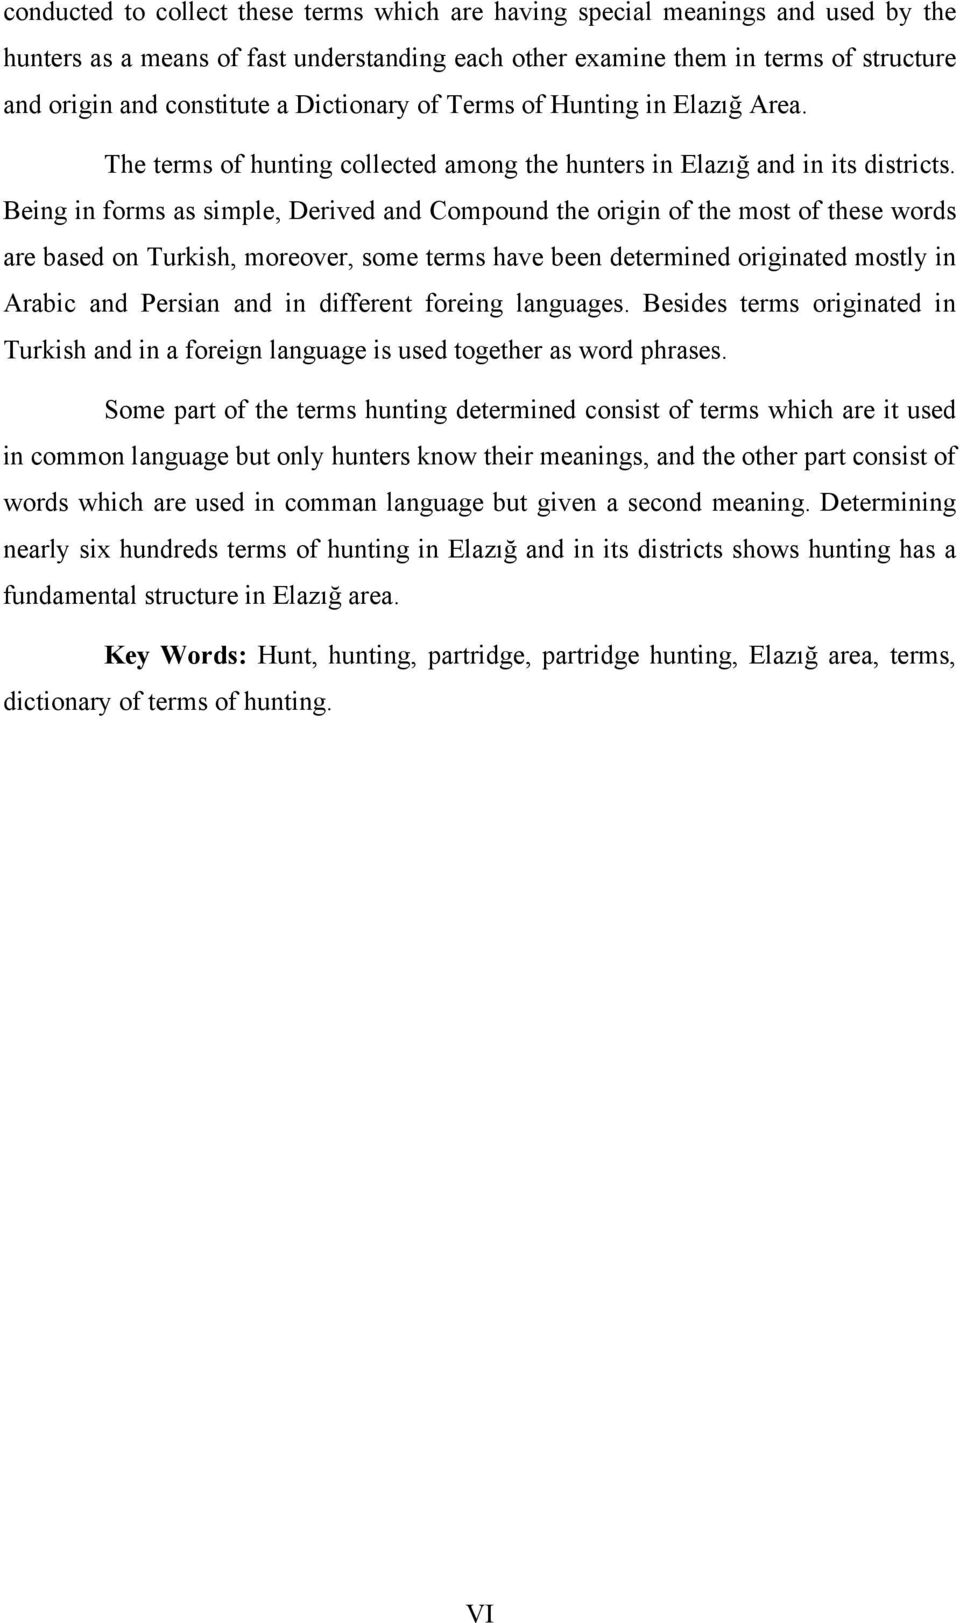 Being in forms as simple, Derived and Compound the origin of the most of these words are based on Turkish, moreover, some terms have been determined originated mostly in Arabic and Persian and in